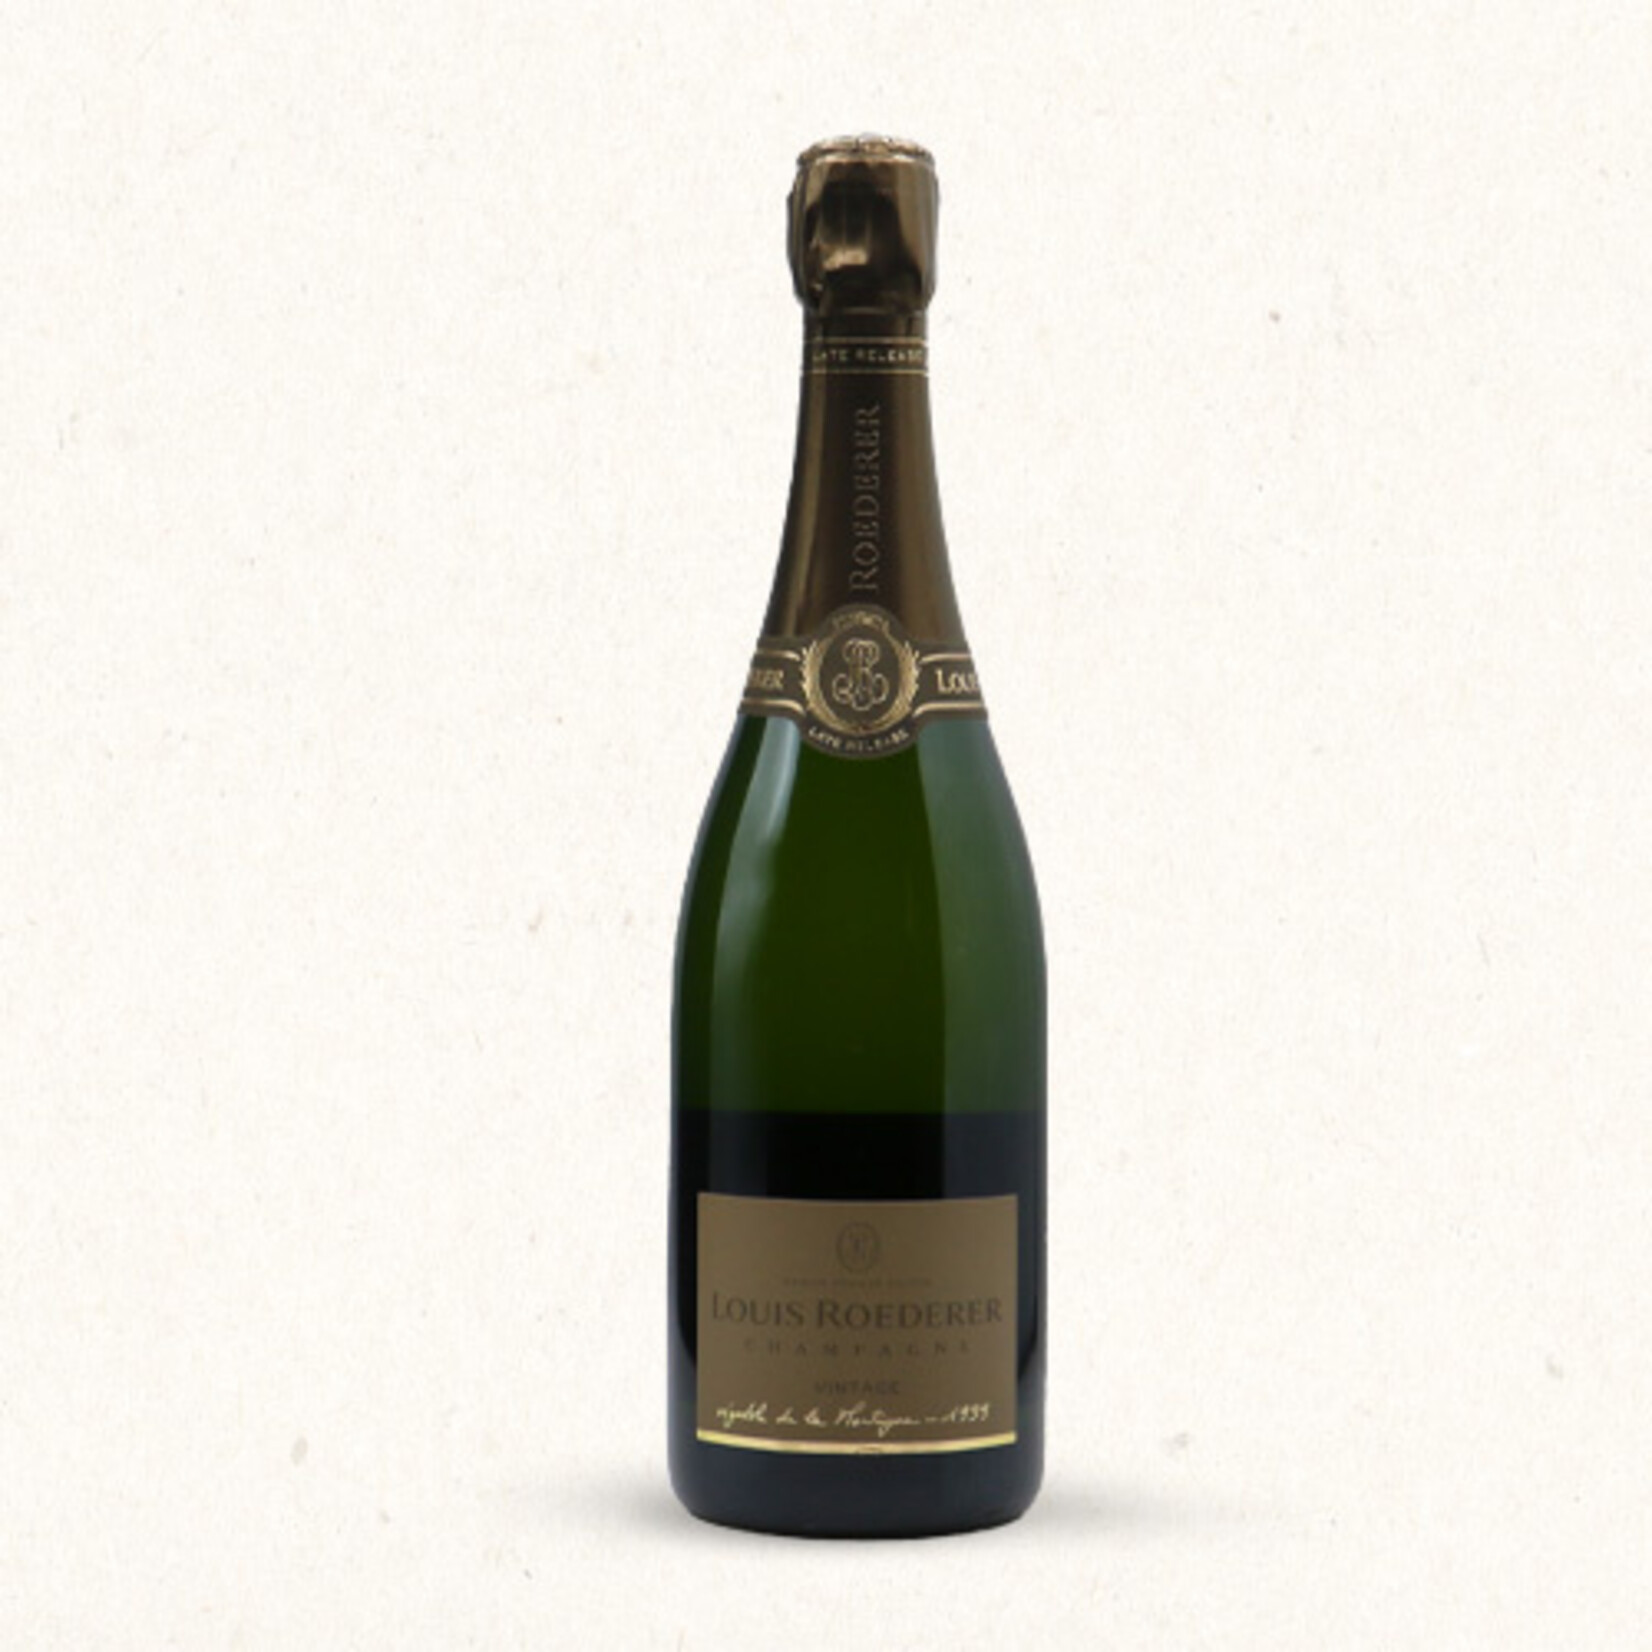 Louis Roederer Vintage 1999 late release giftbox